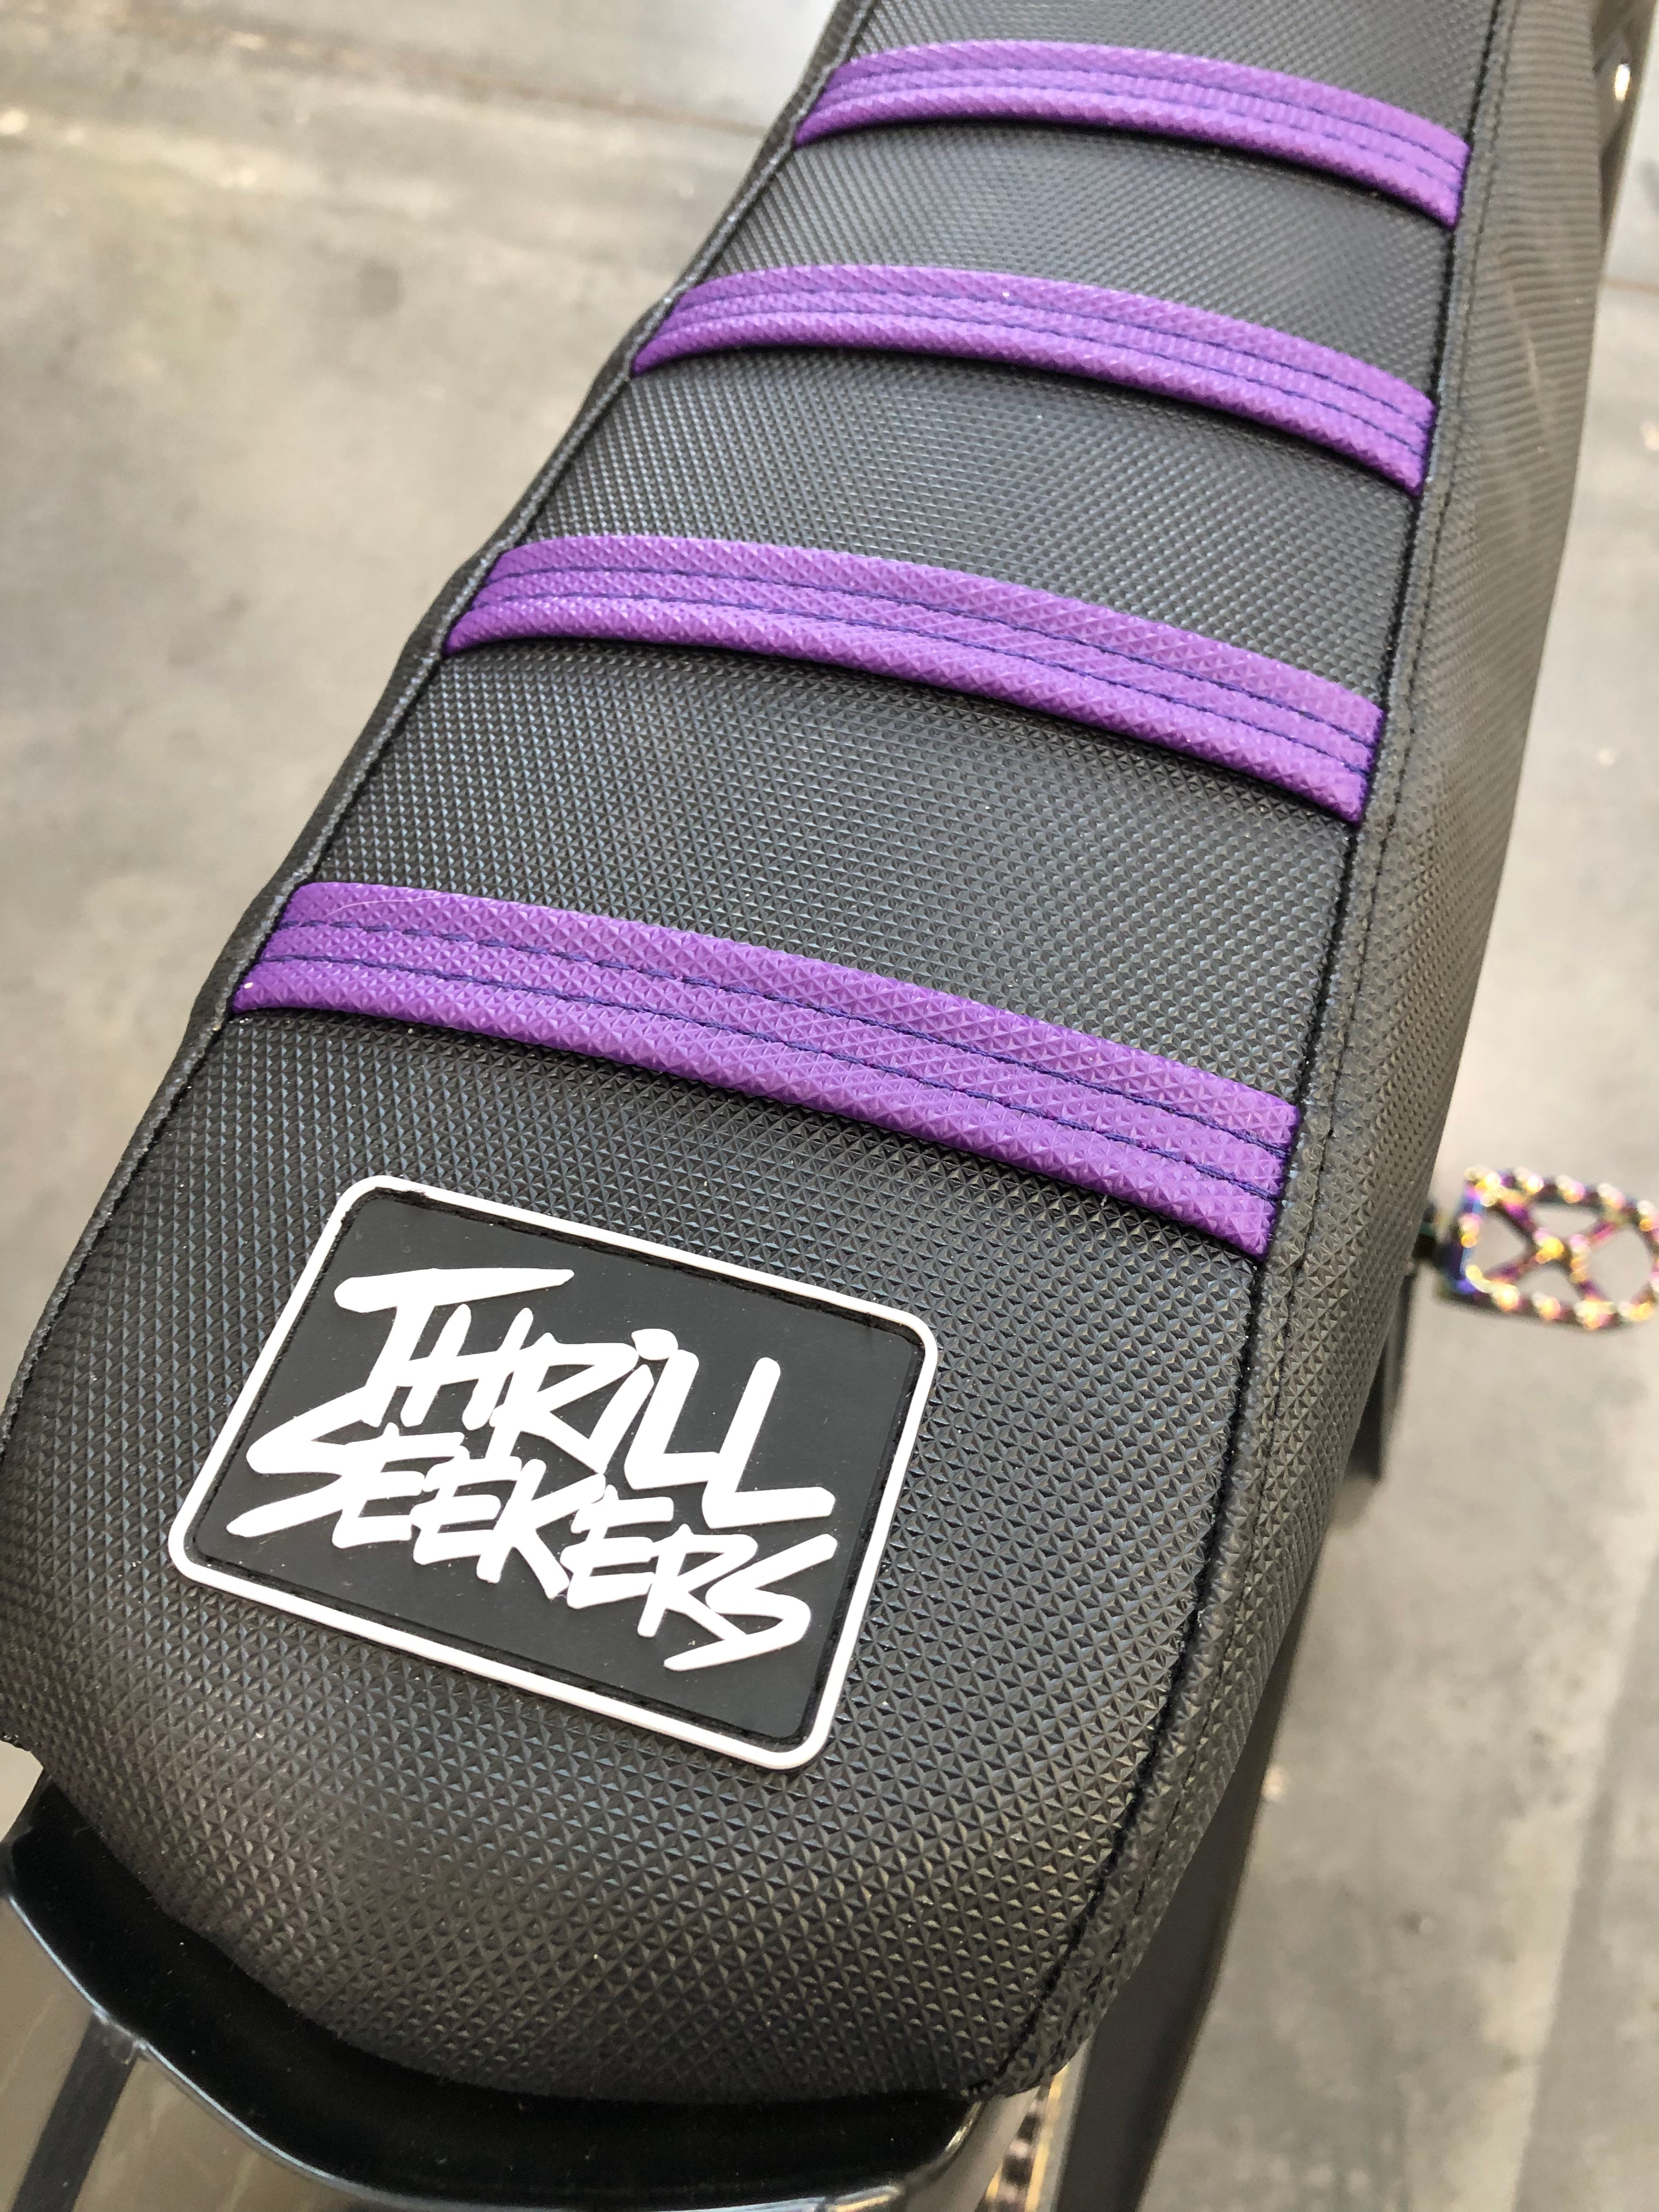 Thrill Seekers Seat Cover for Surron LBX or Segway